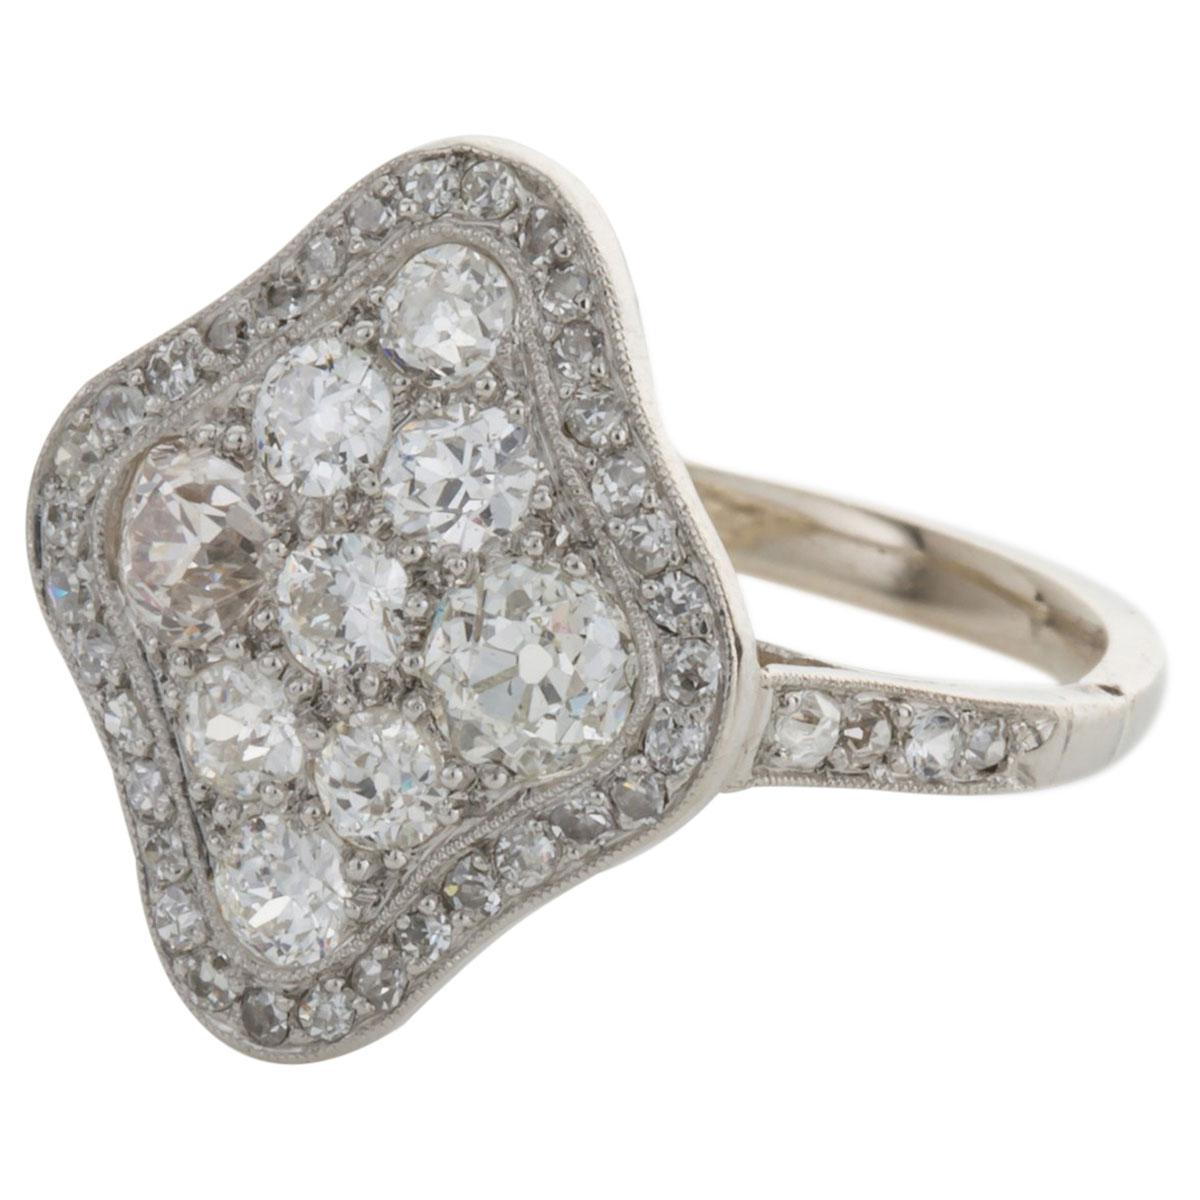 A lovely sparkling shield shape of diamonds that sit beautifully in this pretty ring. There are 9 larger diamonds that form the triangular central section that are surrounded with a border of smaller diamonds in a millegrain setting. The shoulders